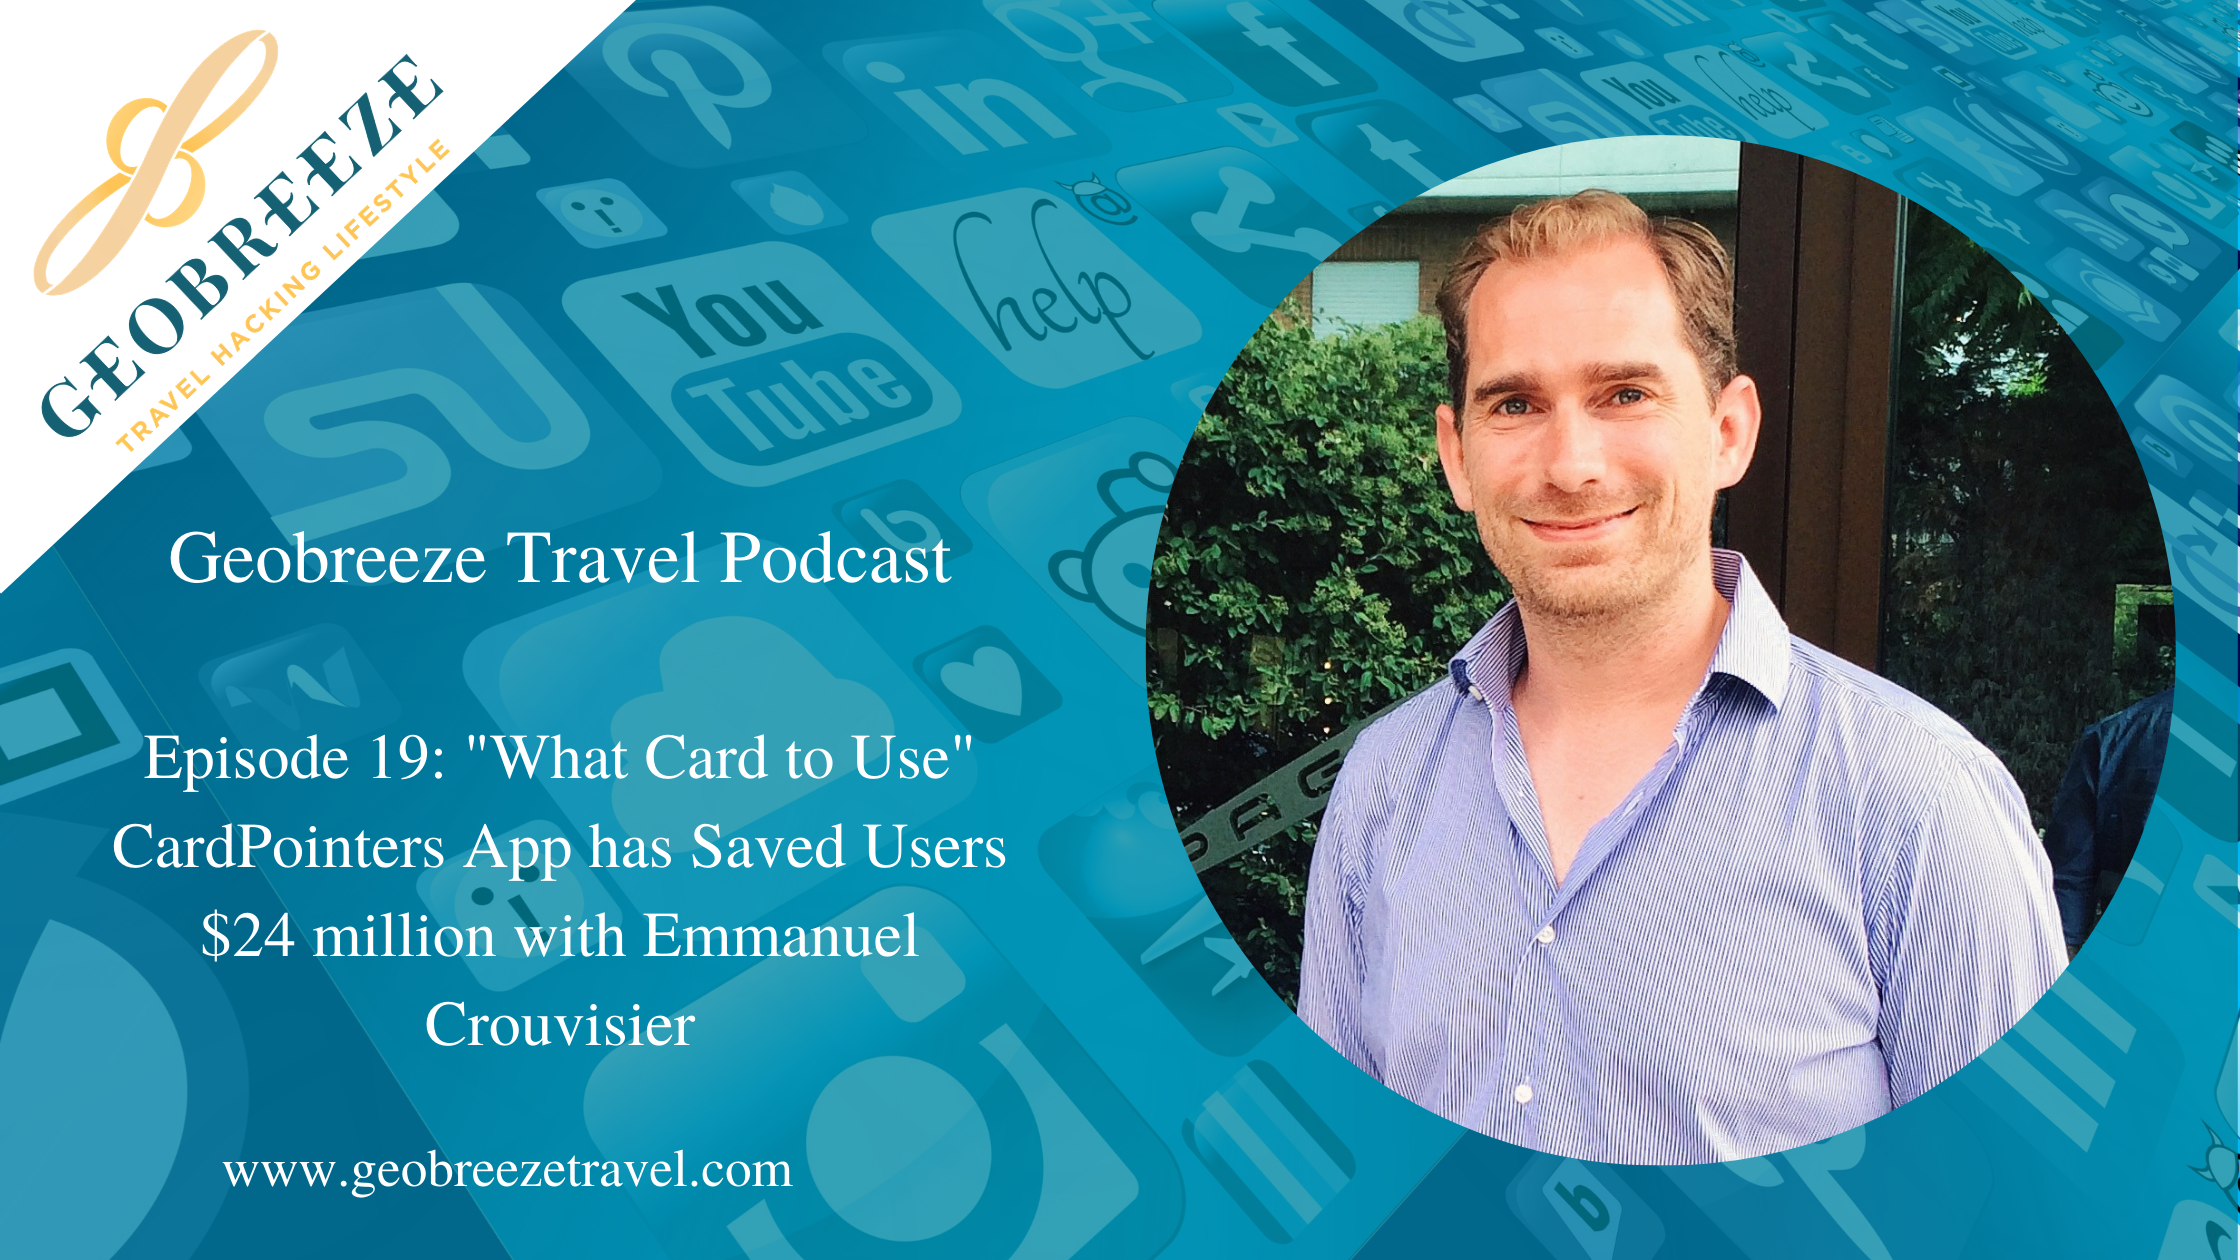 Episode 19: CardPointers “What Card to Use” App has Saved Users $24 Million with Emmanuel Crouvisier